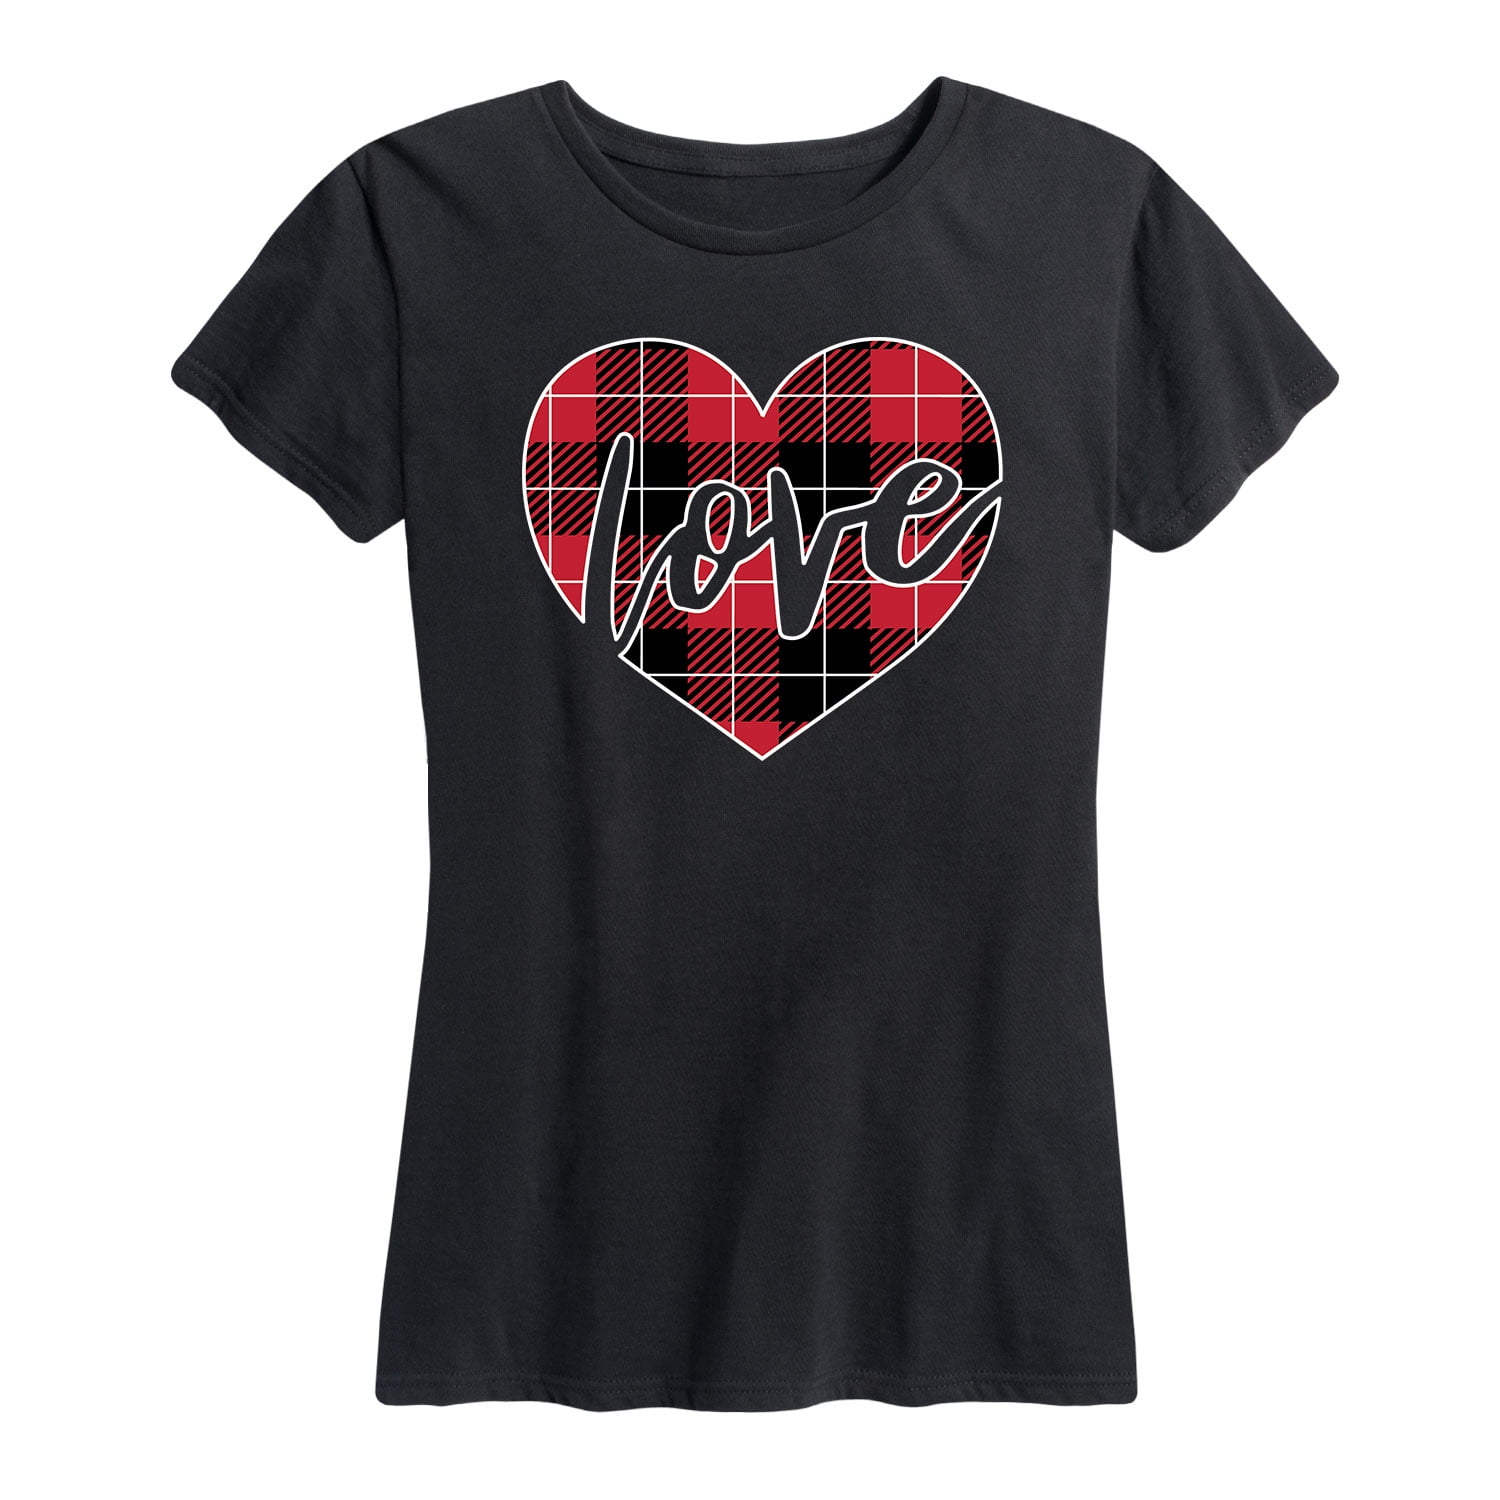 Grandma Gifts I Love Being A Mamaw Funny Letter Print Shirts Womens Short Sleeve Tops Cute Truck Red Plaid Graphic Tees 